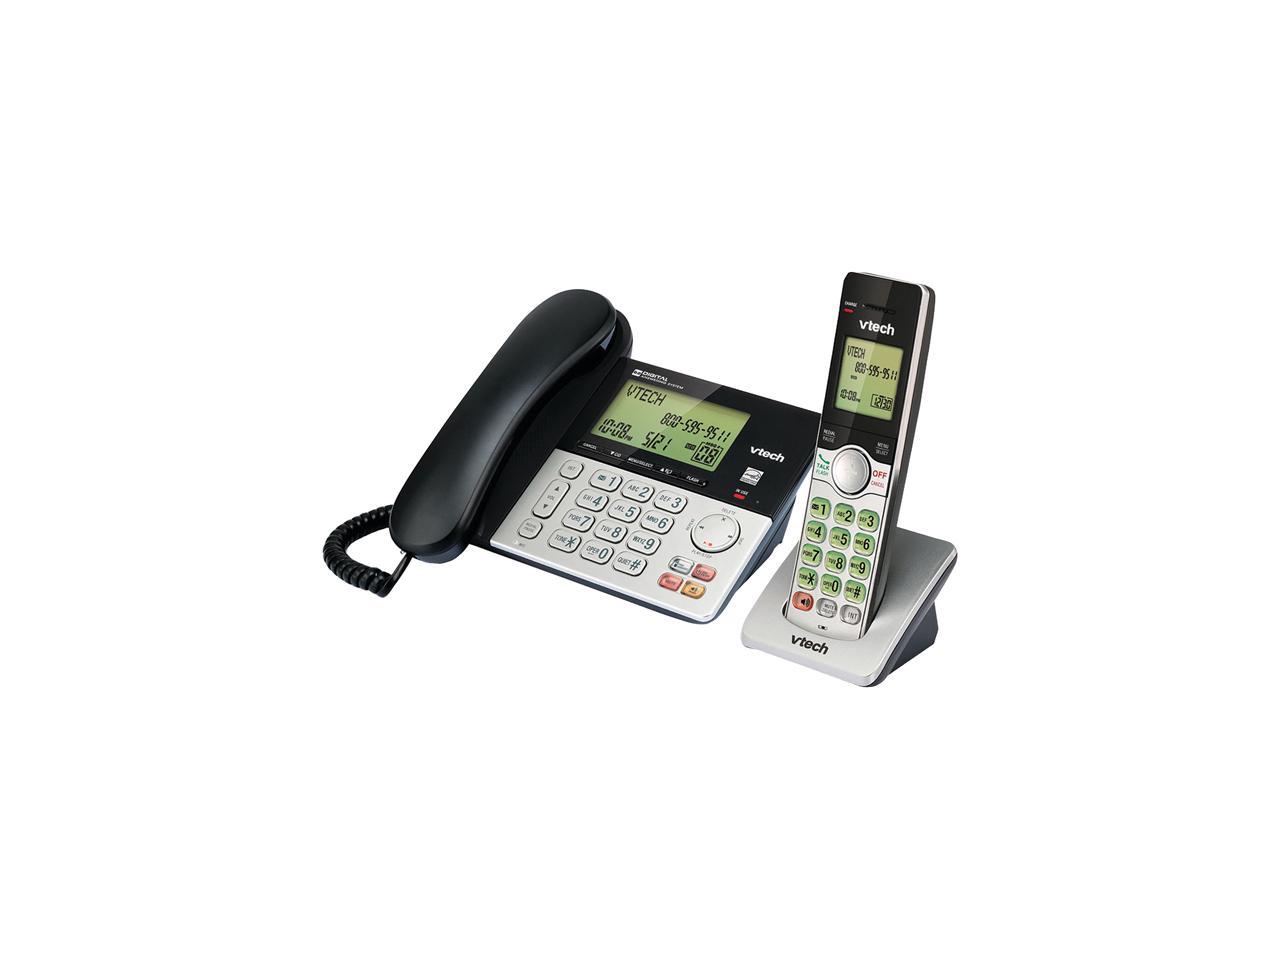 VTech CS6949 Corded/Cordless 2-Handset Telephone System with Dual Caller ID, Sil | eBay